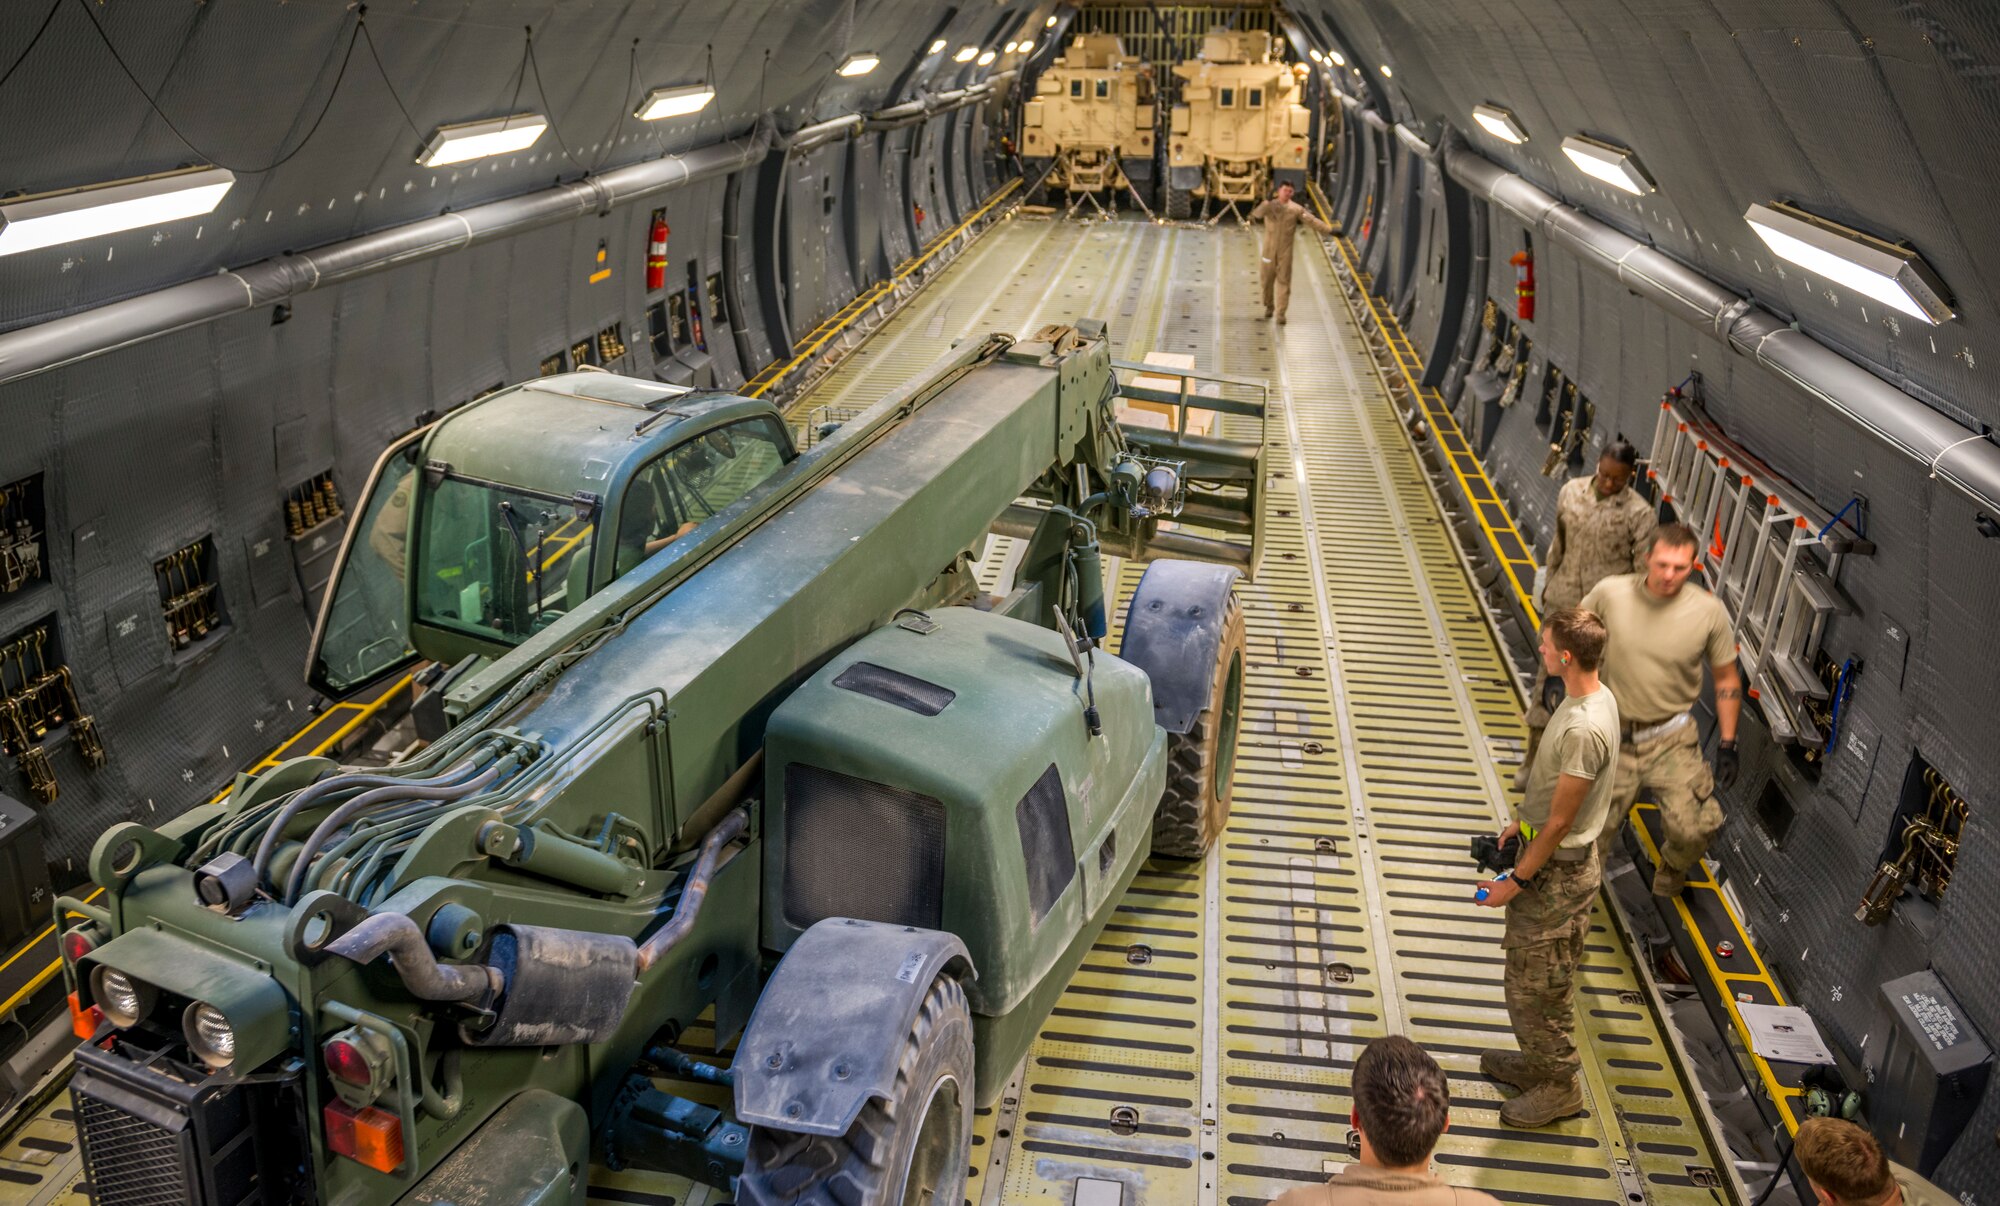 Airmen from the 9th Airlift Squadron and 455th Expeditionary Aerial Port Squadron with Marines from the Marine Expeditionary Brigade prepare to load vehicles into a C-5M Super Galaxy Oct. 6, 2014 at Camp Bastion, Afghanistan. Airmen and Marines loaded more than 266,000 pounds of cargo onto the C-5M as part of retrograde operations in Afghanistan. Aircrews for the retrograde operations, managed by the 385th Air Expeditionary Group Detachment 1, surpassed 11 million pounds of cargo transported in a 50-day period. During this time frame, crews under the 385th AEG broke Air Mobility Command's operational cargo load record five times. The heaviest load to date is 280,880 pounds. (U.S. Air Force photo by Staff Sgt. Jeremy Bowcock)